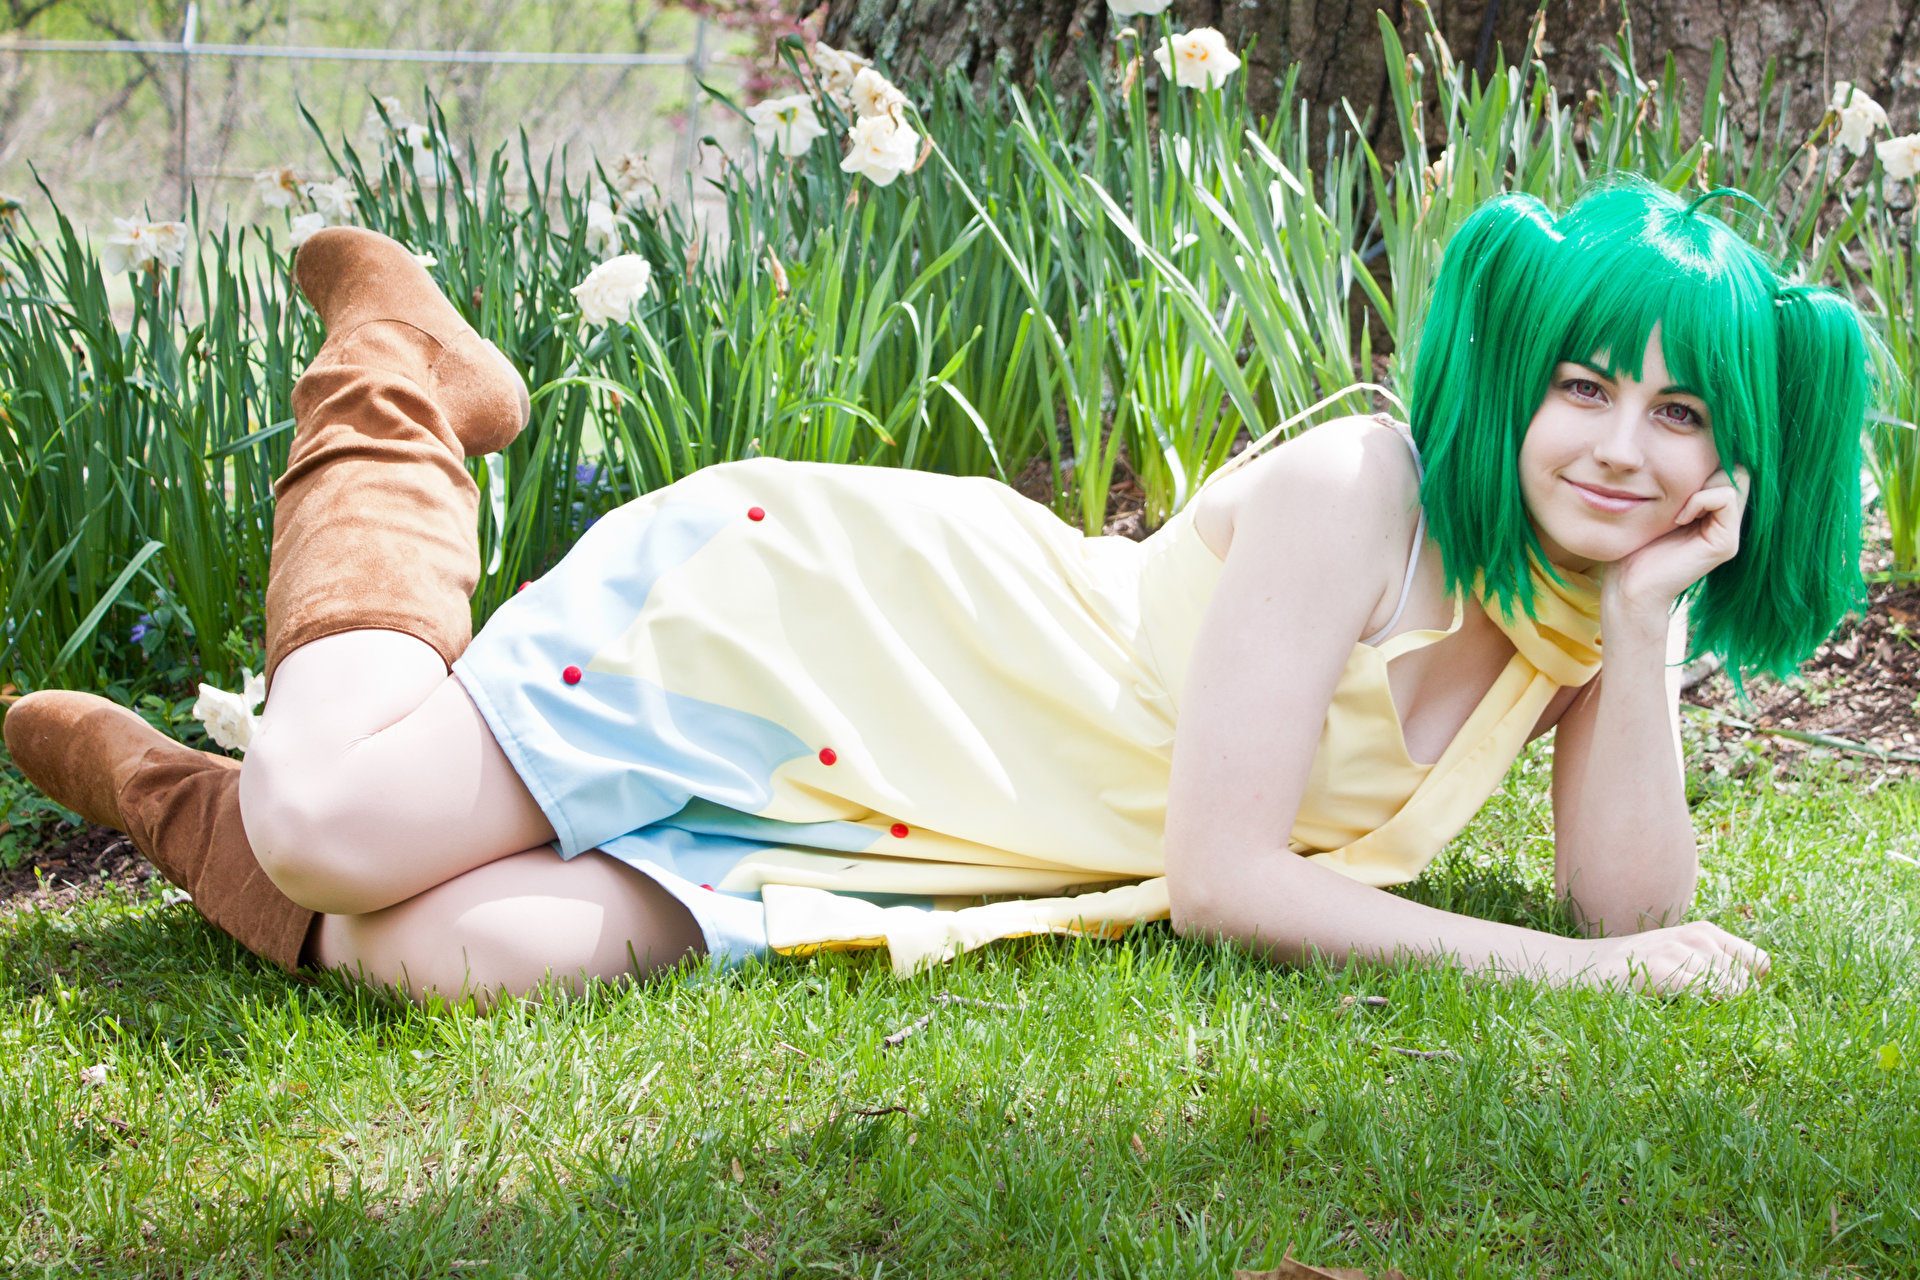 Cospix.net photo featuring Morning Addict and Brie-chan Cosplay